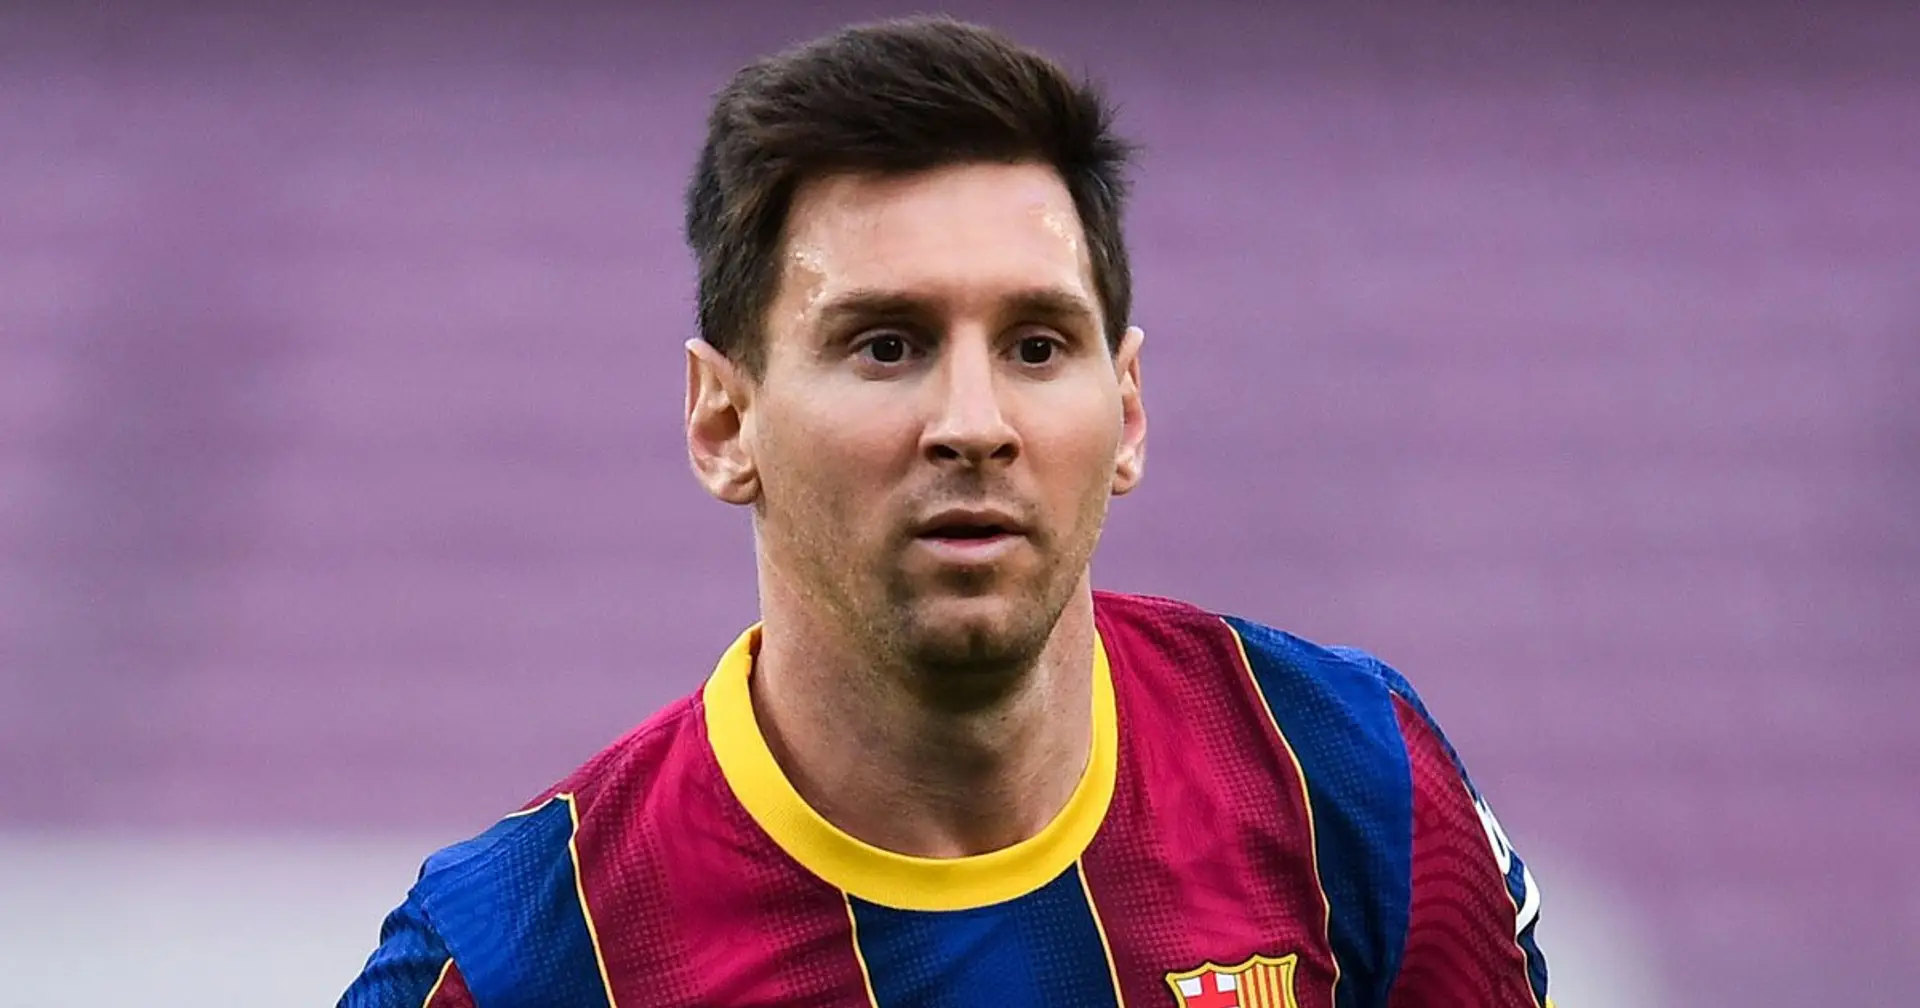 🐐 All latest Leo Messi news in one place: leadership skills, Ballon d'Or & more